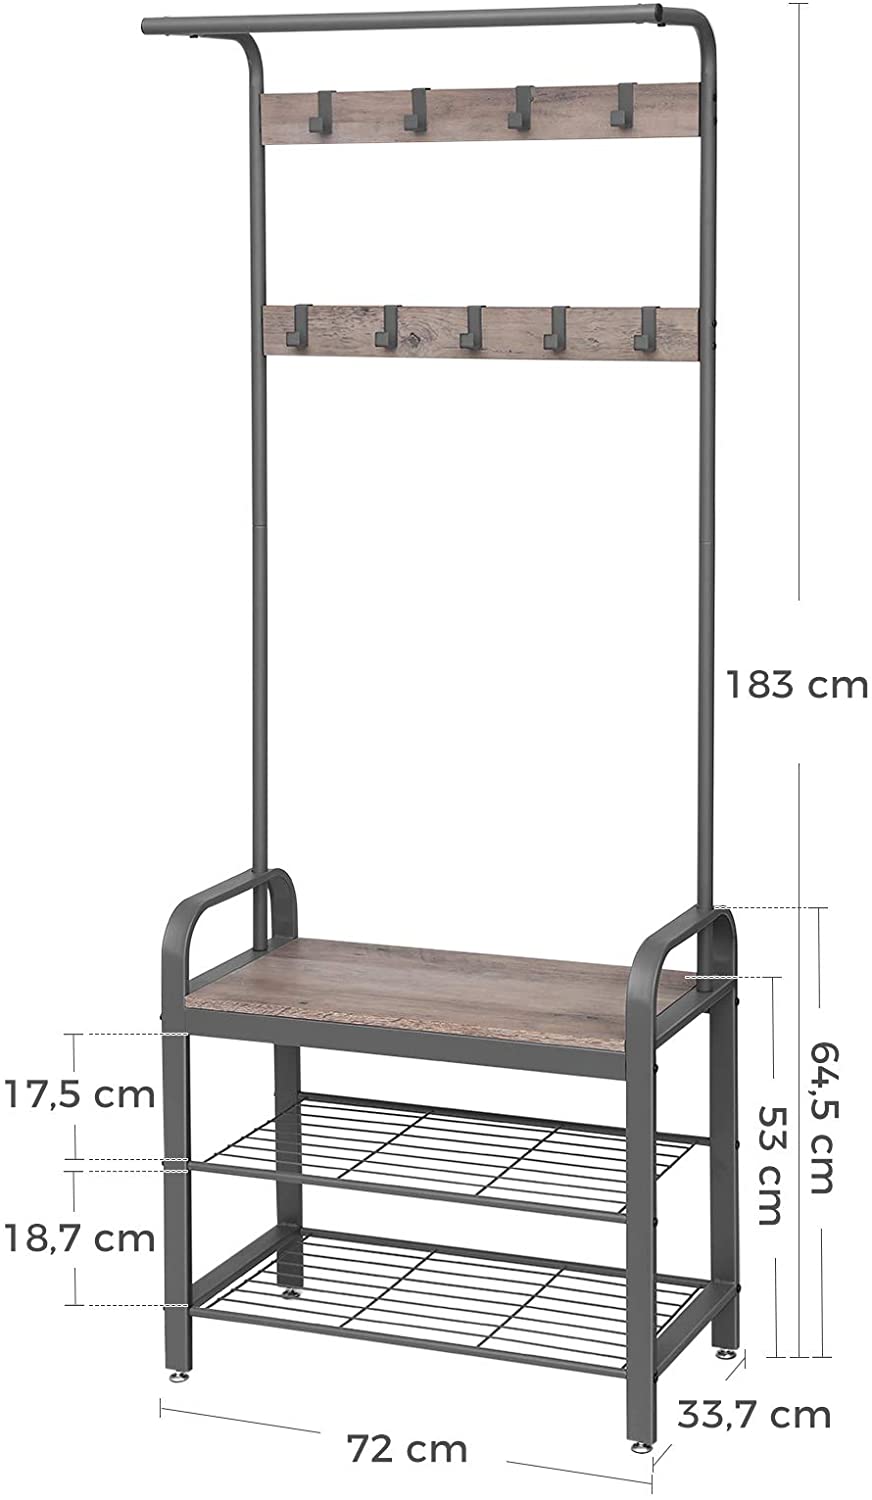 Coat Rack Stand, Hall Tree Free Standing, Coat Stand with Bench, Shoes Rack with Removable Hooks, Height 183 cm, Industrial, Grey metal Frame, Greige and Grey HSR40MG RAW58.dk 